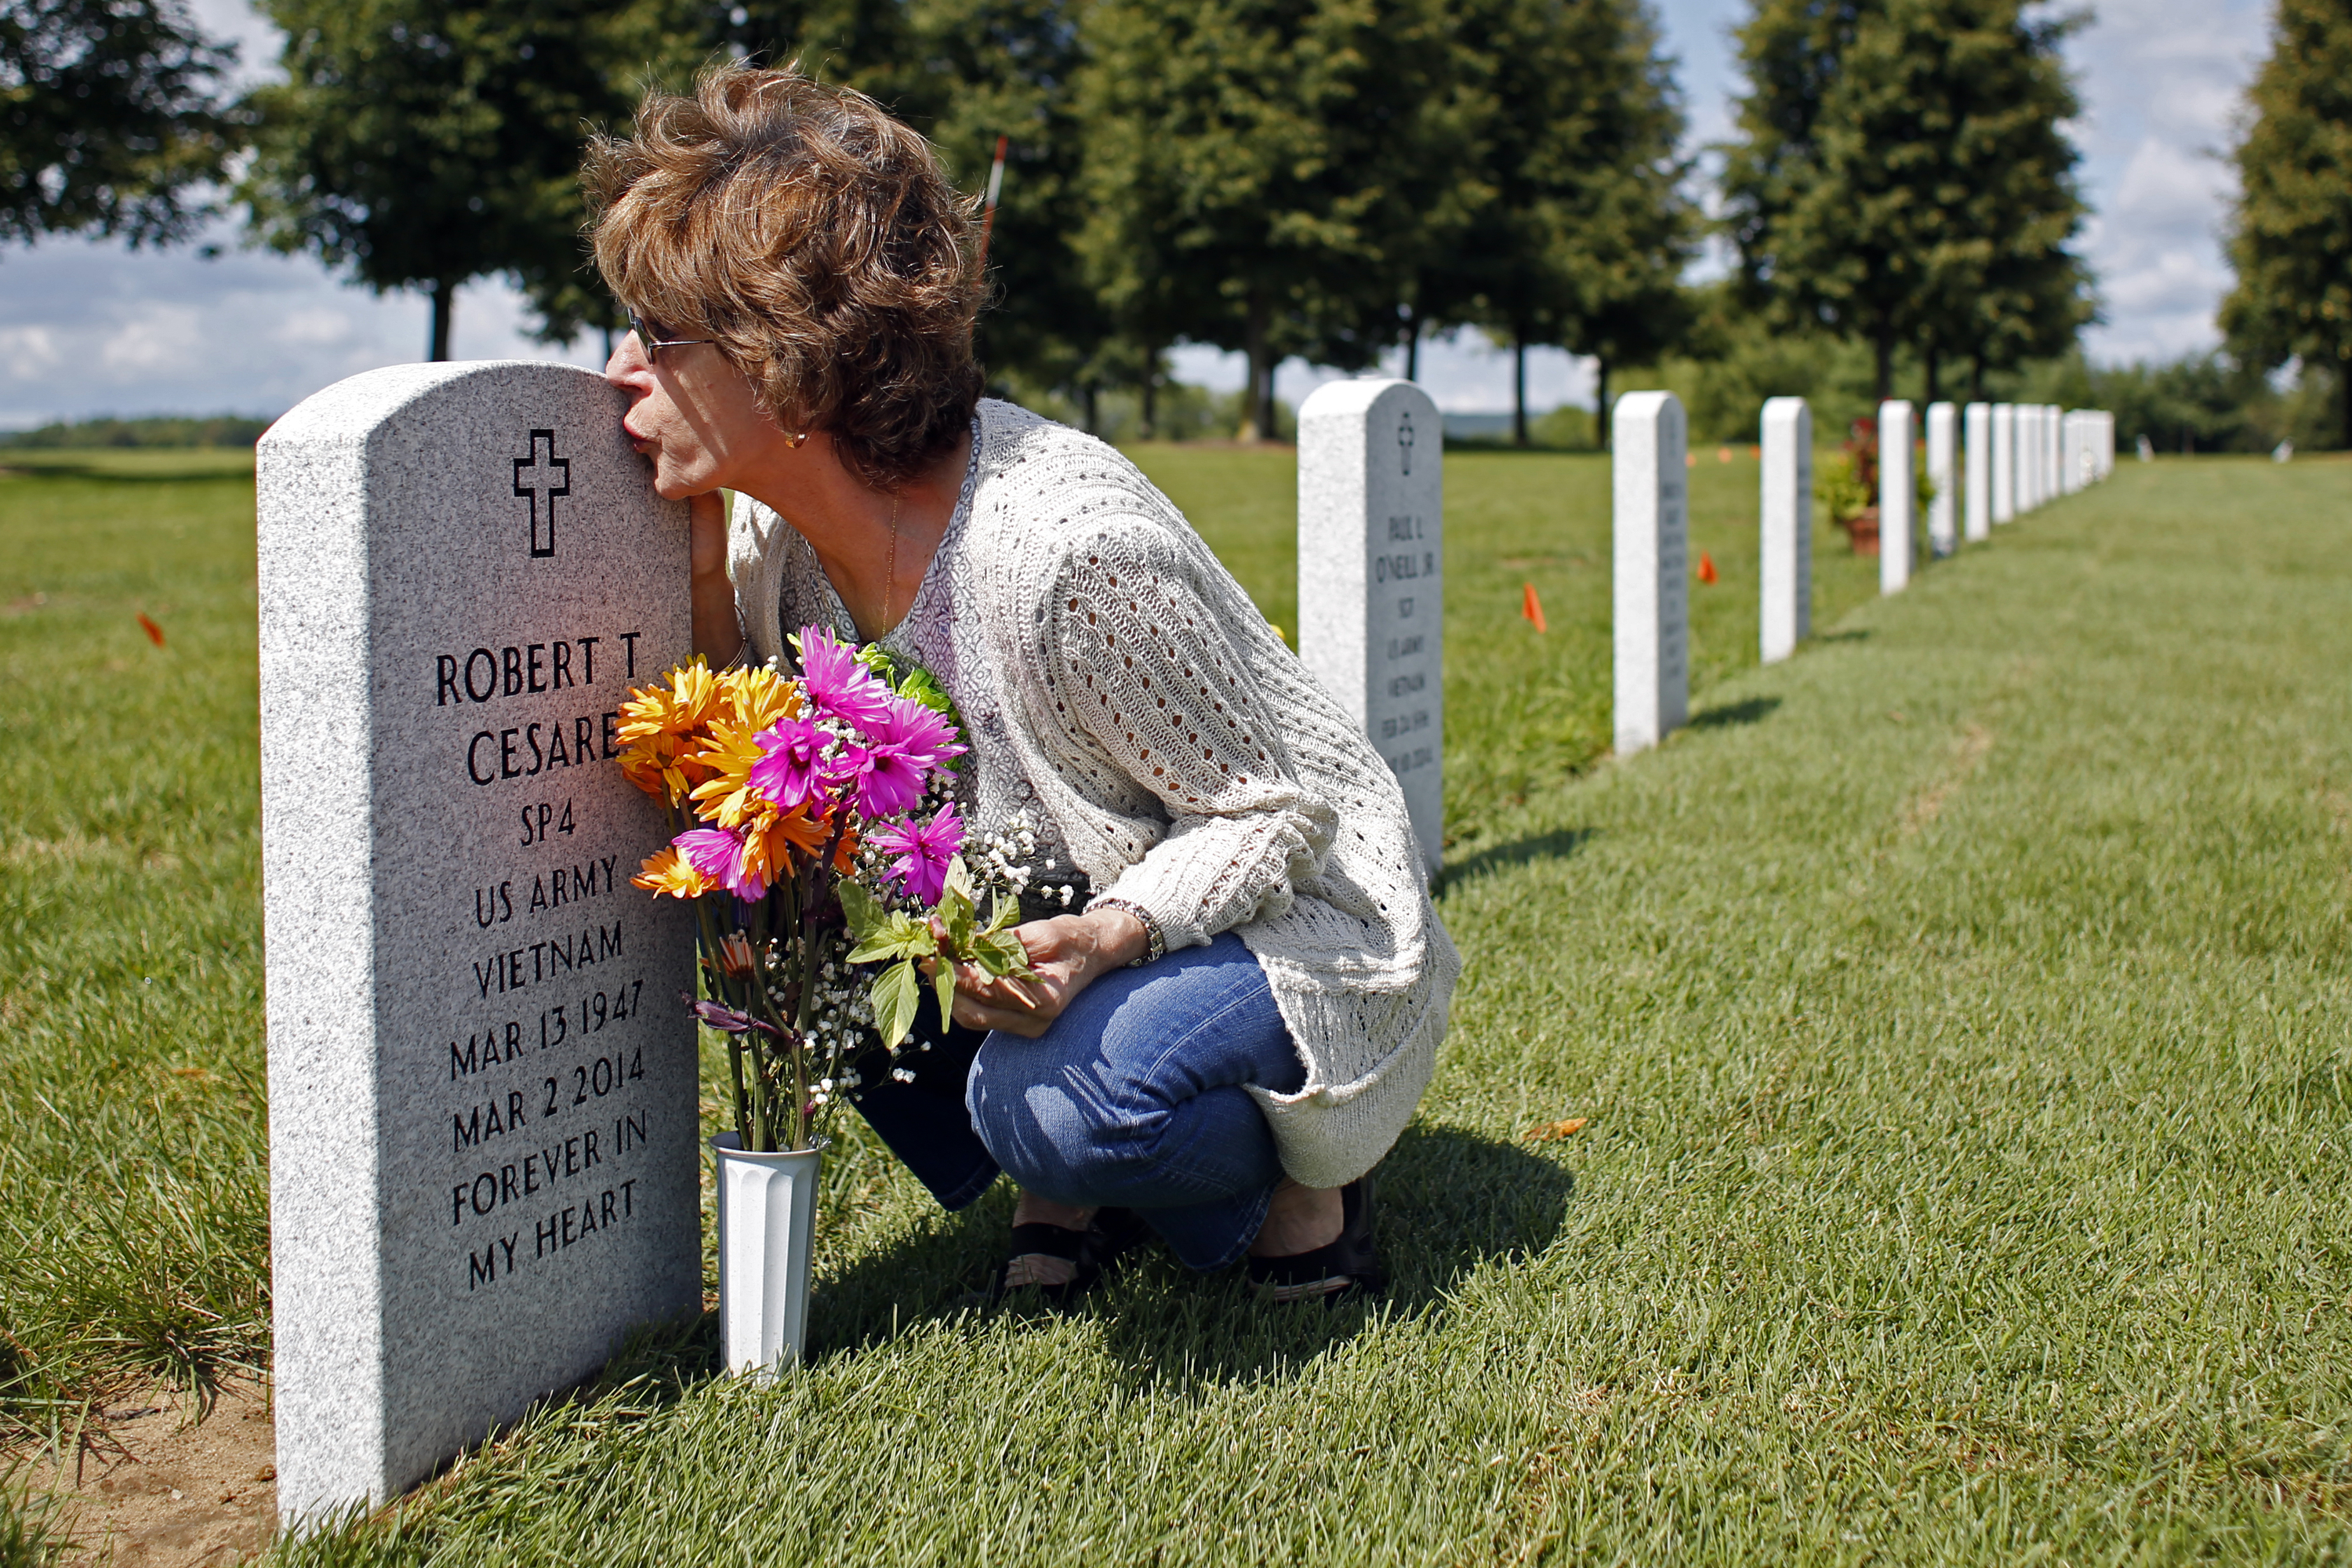 Francesca Cesare kisses her late husband's tombstone  on Thursday, August 14, 2014 in Saratoga National Cemetery in Saratoga, N.Y.  Robert died in 2014 of three different types of cancer related to exposure to Agent Orange while serving in the United States Army during the Vietnam War.